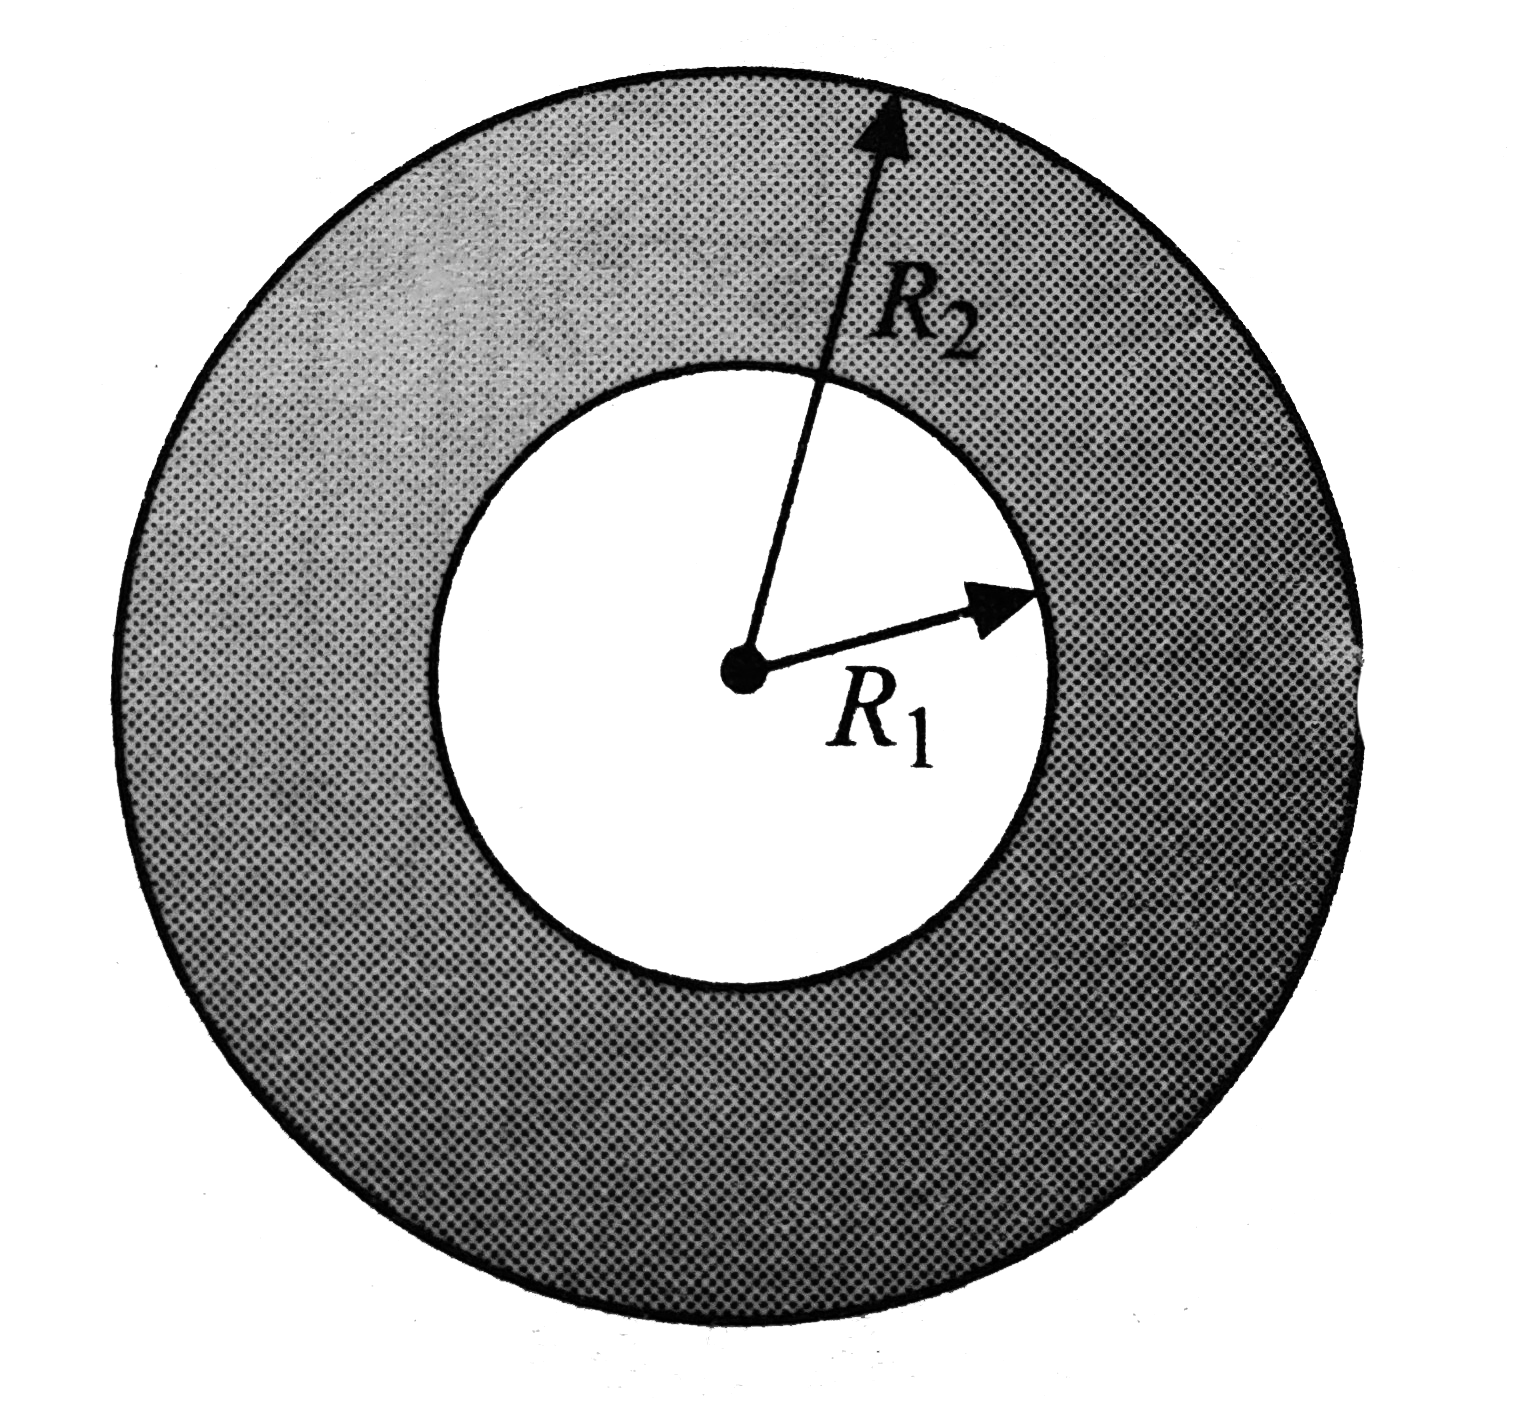 A hollow dielectric sphere, as shown in figure, has inner and outer radii of R1 and R2, respectively. The total charge carried by the sphere is +Q, this charge is uniformly distributed R1 and R2.      a. the electric field for rltR1 is zero. (Yes//No)   b. the electric field for R1ltrltR2 is given by ........... .   c. the electric field for rgtR2 is given by .......... .